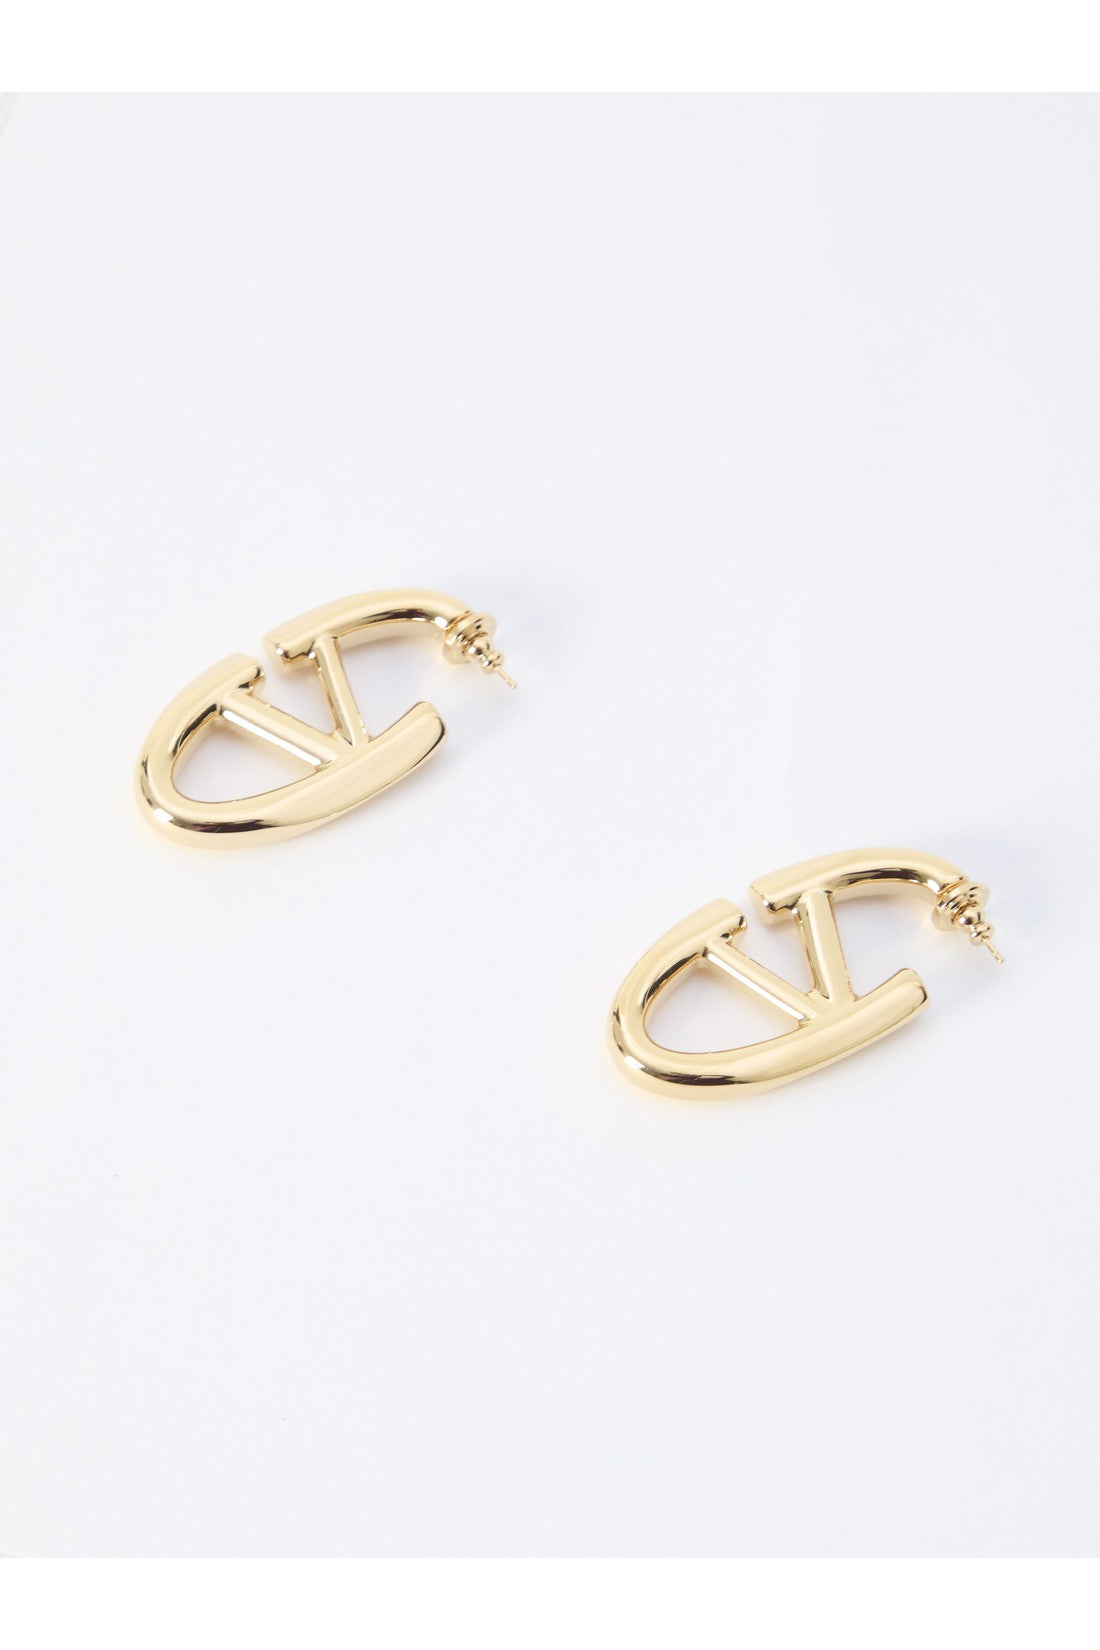 VLogo The Bold Edition earrings